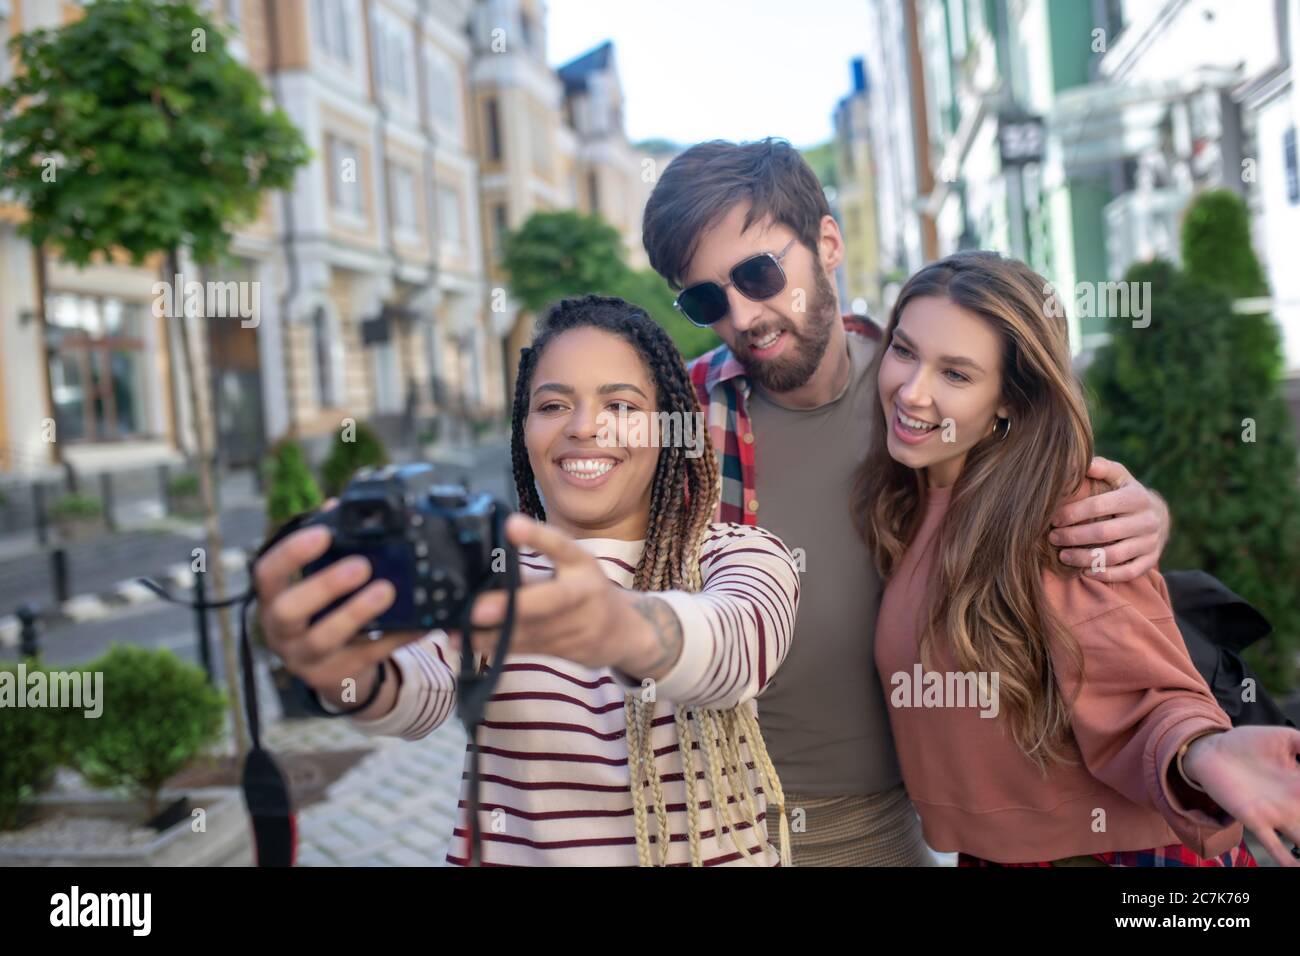 Girl with dreadlocks taking selfie on camera with friends in city. Stock Photo